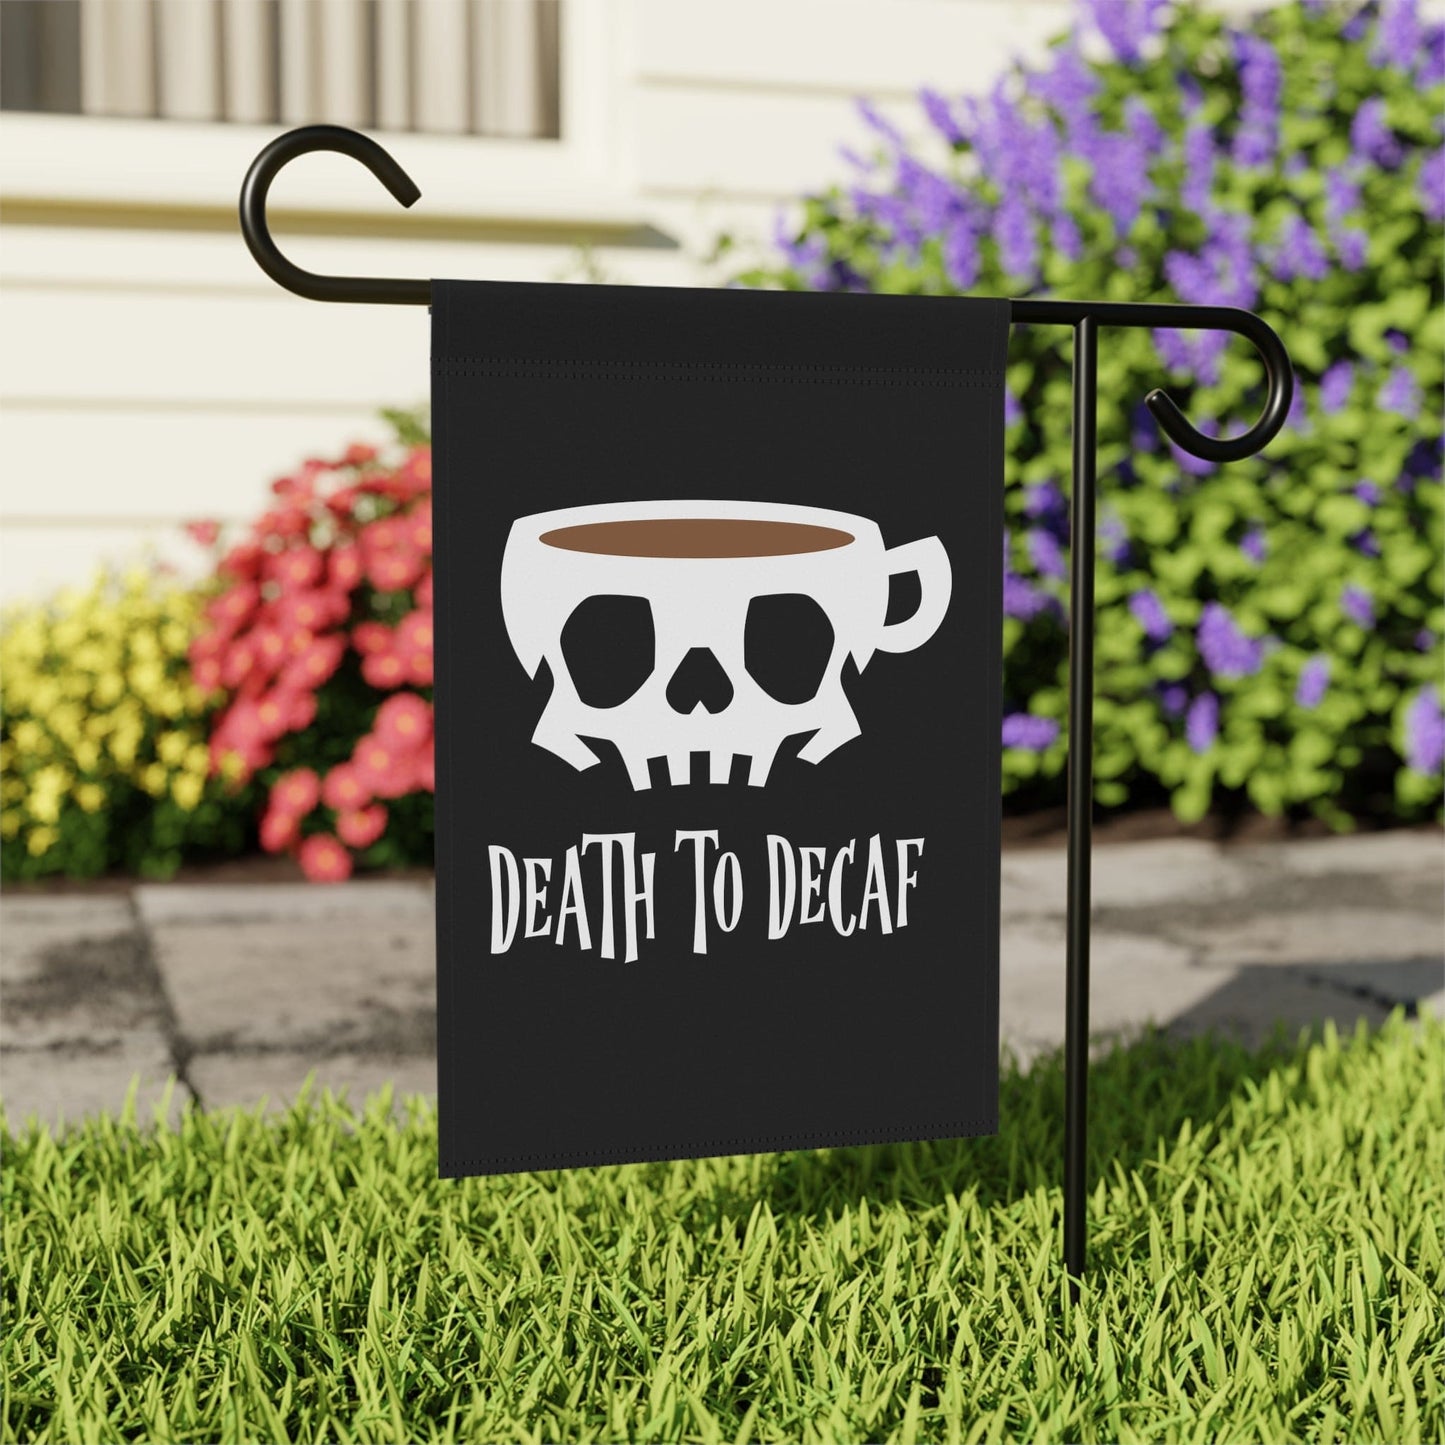 Good Bean Gifts "Death to Decaf" House Banner (Black background) 12'' × 18''